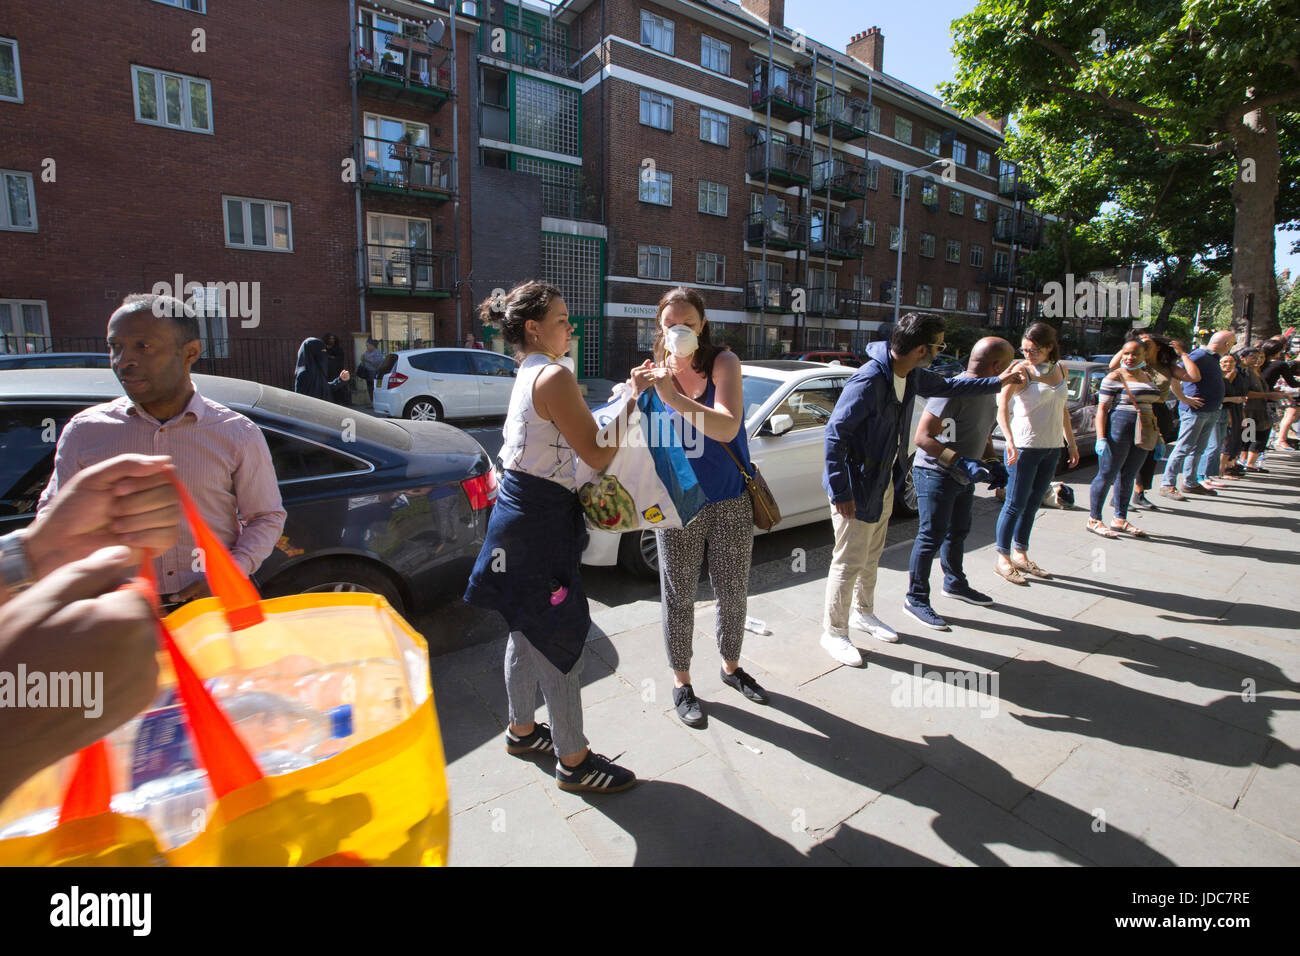 Local community dispensing food and clothes to help aid the victims left homeless after the Grenfell Tower fire disaster, West London, UK Stock Photo